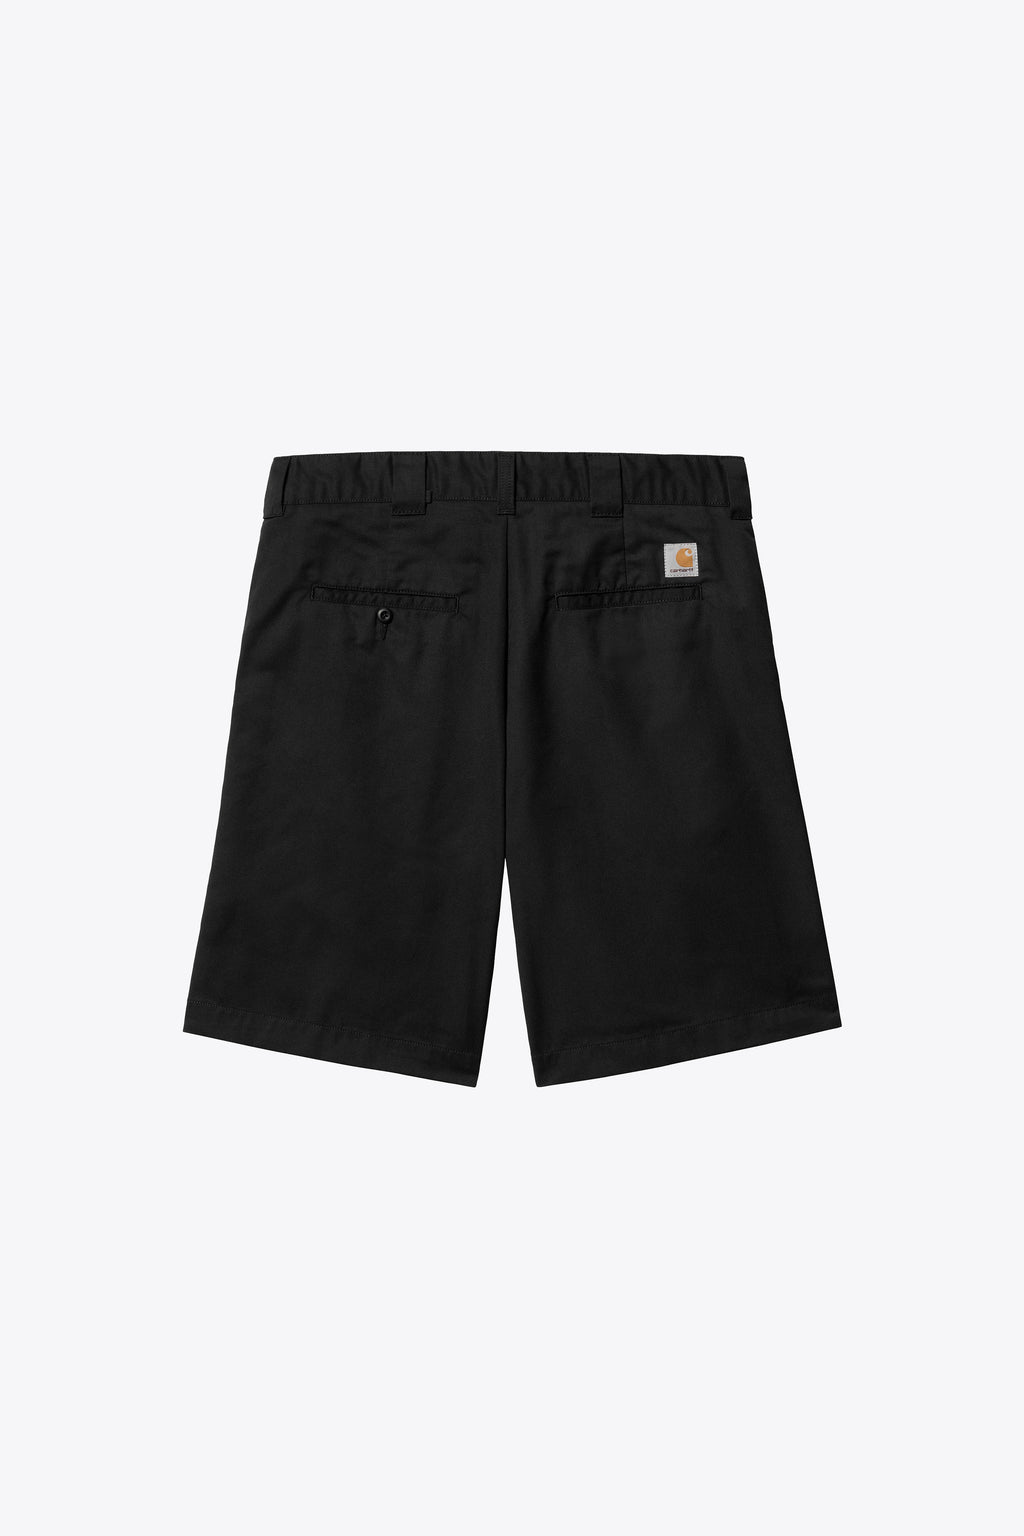 alt-image__Black-cotton-twill-relaxed-fit-short---Craft-Short